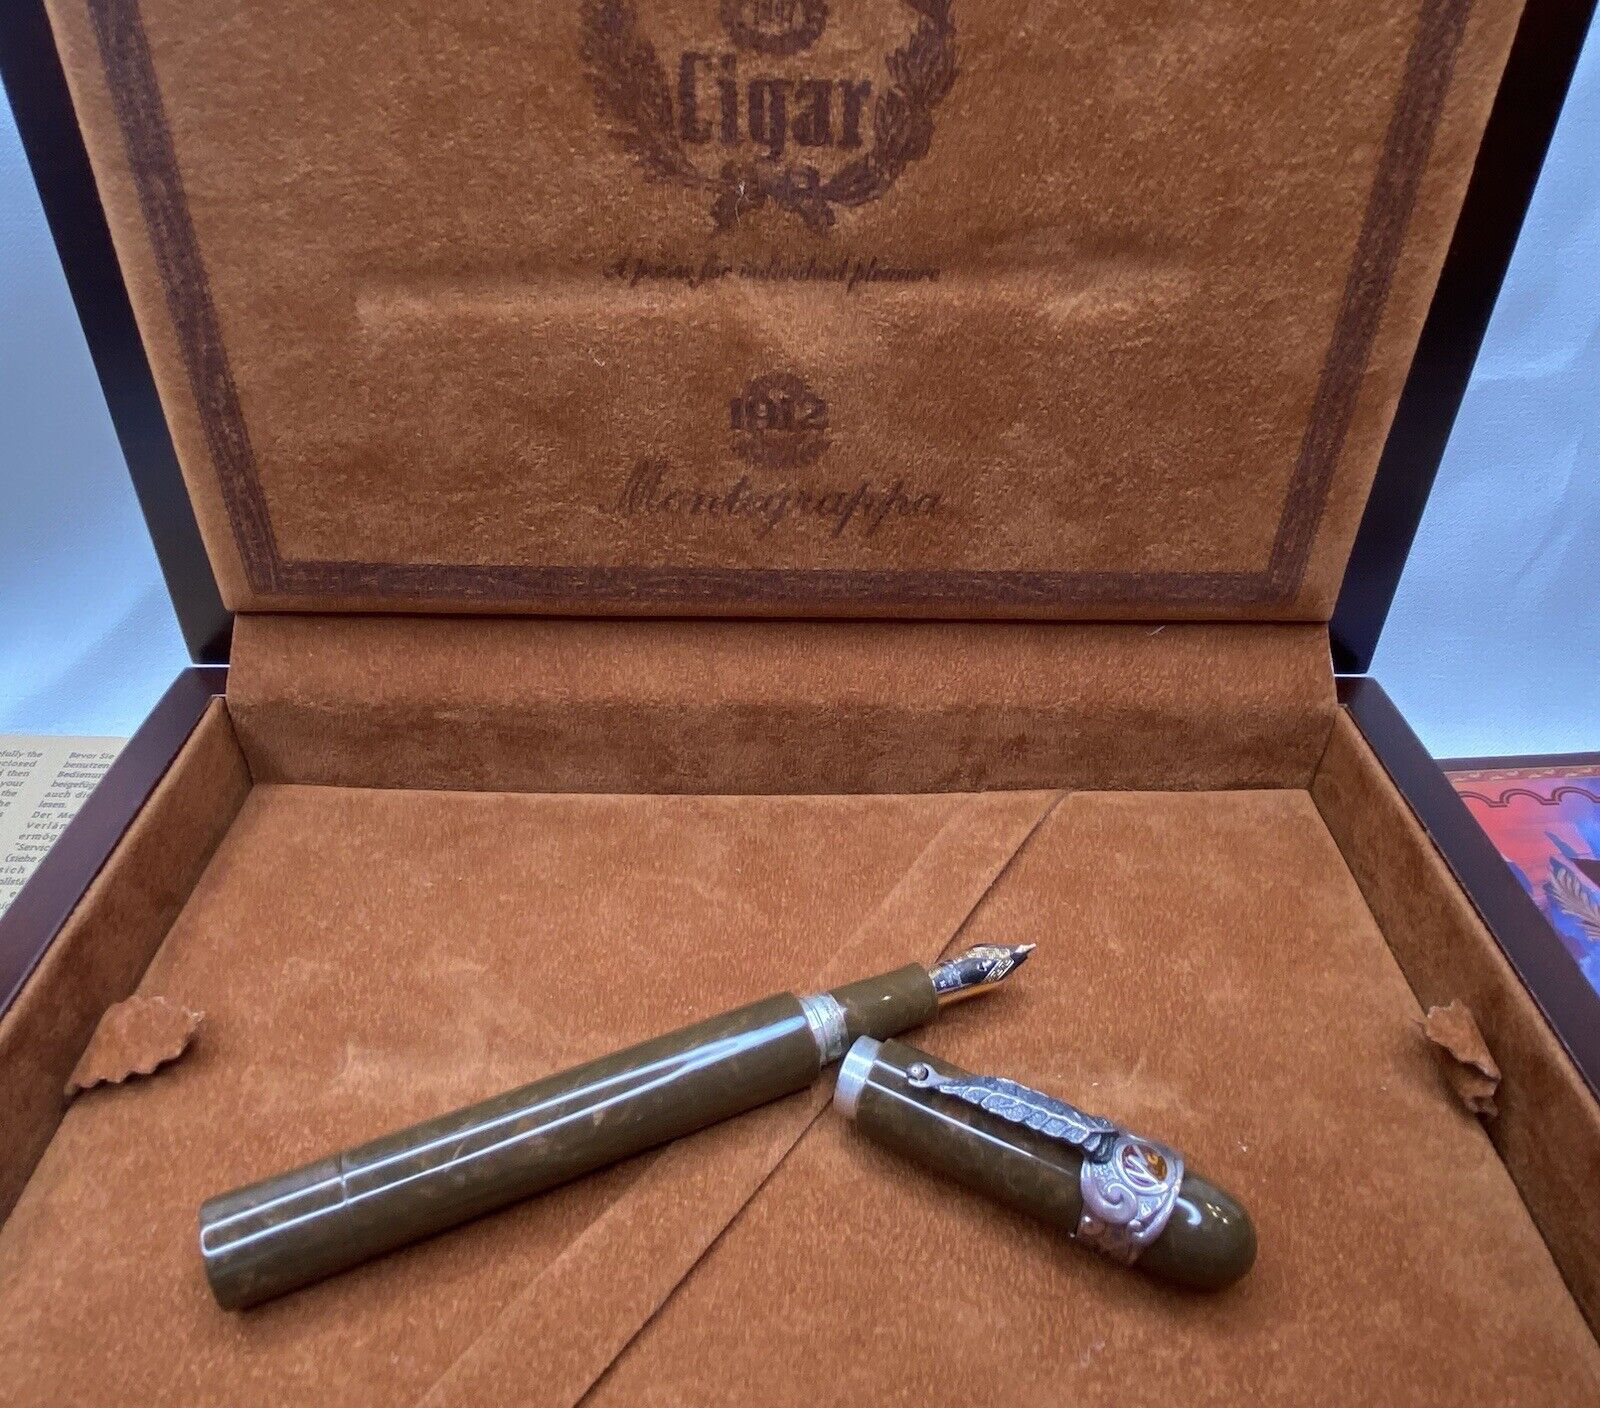 1912 MONTEGRAPPA CIGAR FOUNTAIN PEN EMBELLISHED WITH STERLING SILVER #2368